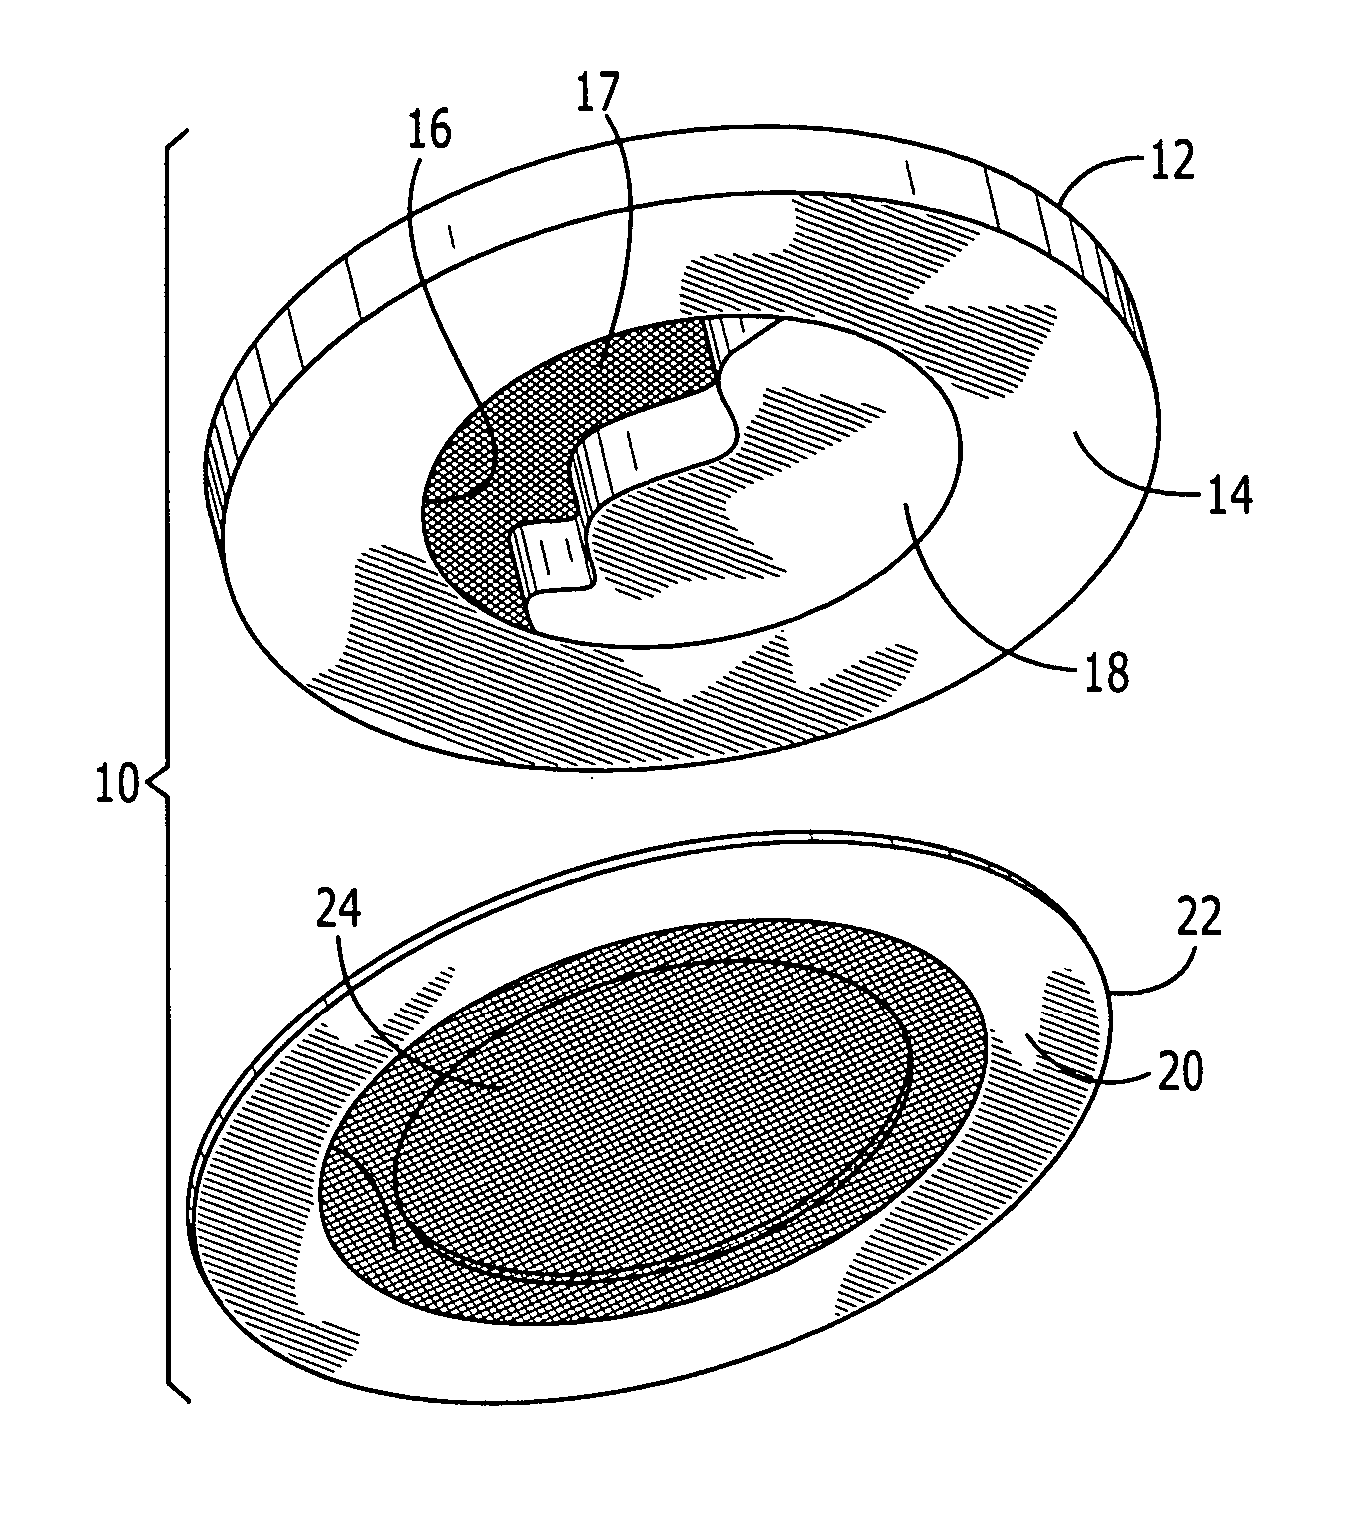 Apparatus and method for enhancing transdermal drug delivery